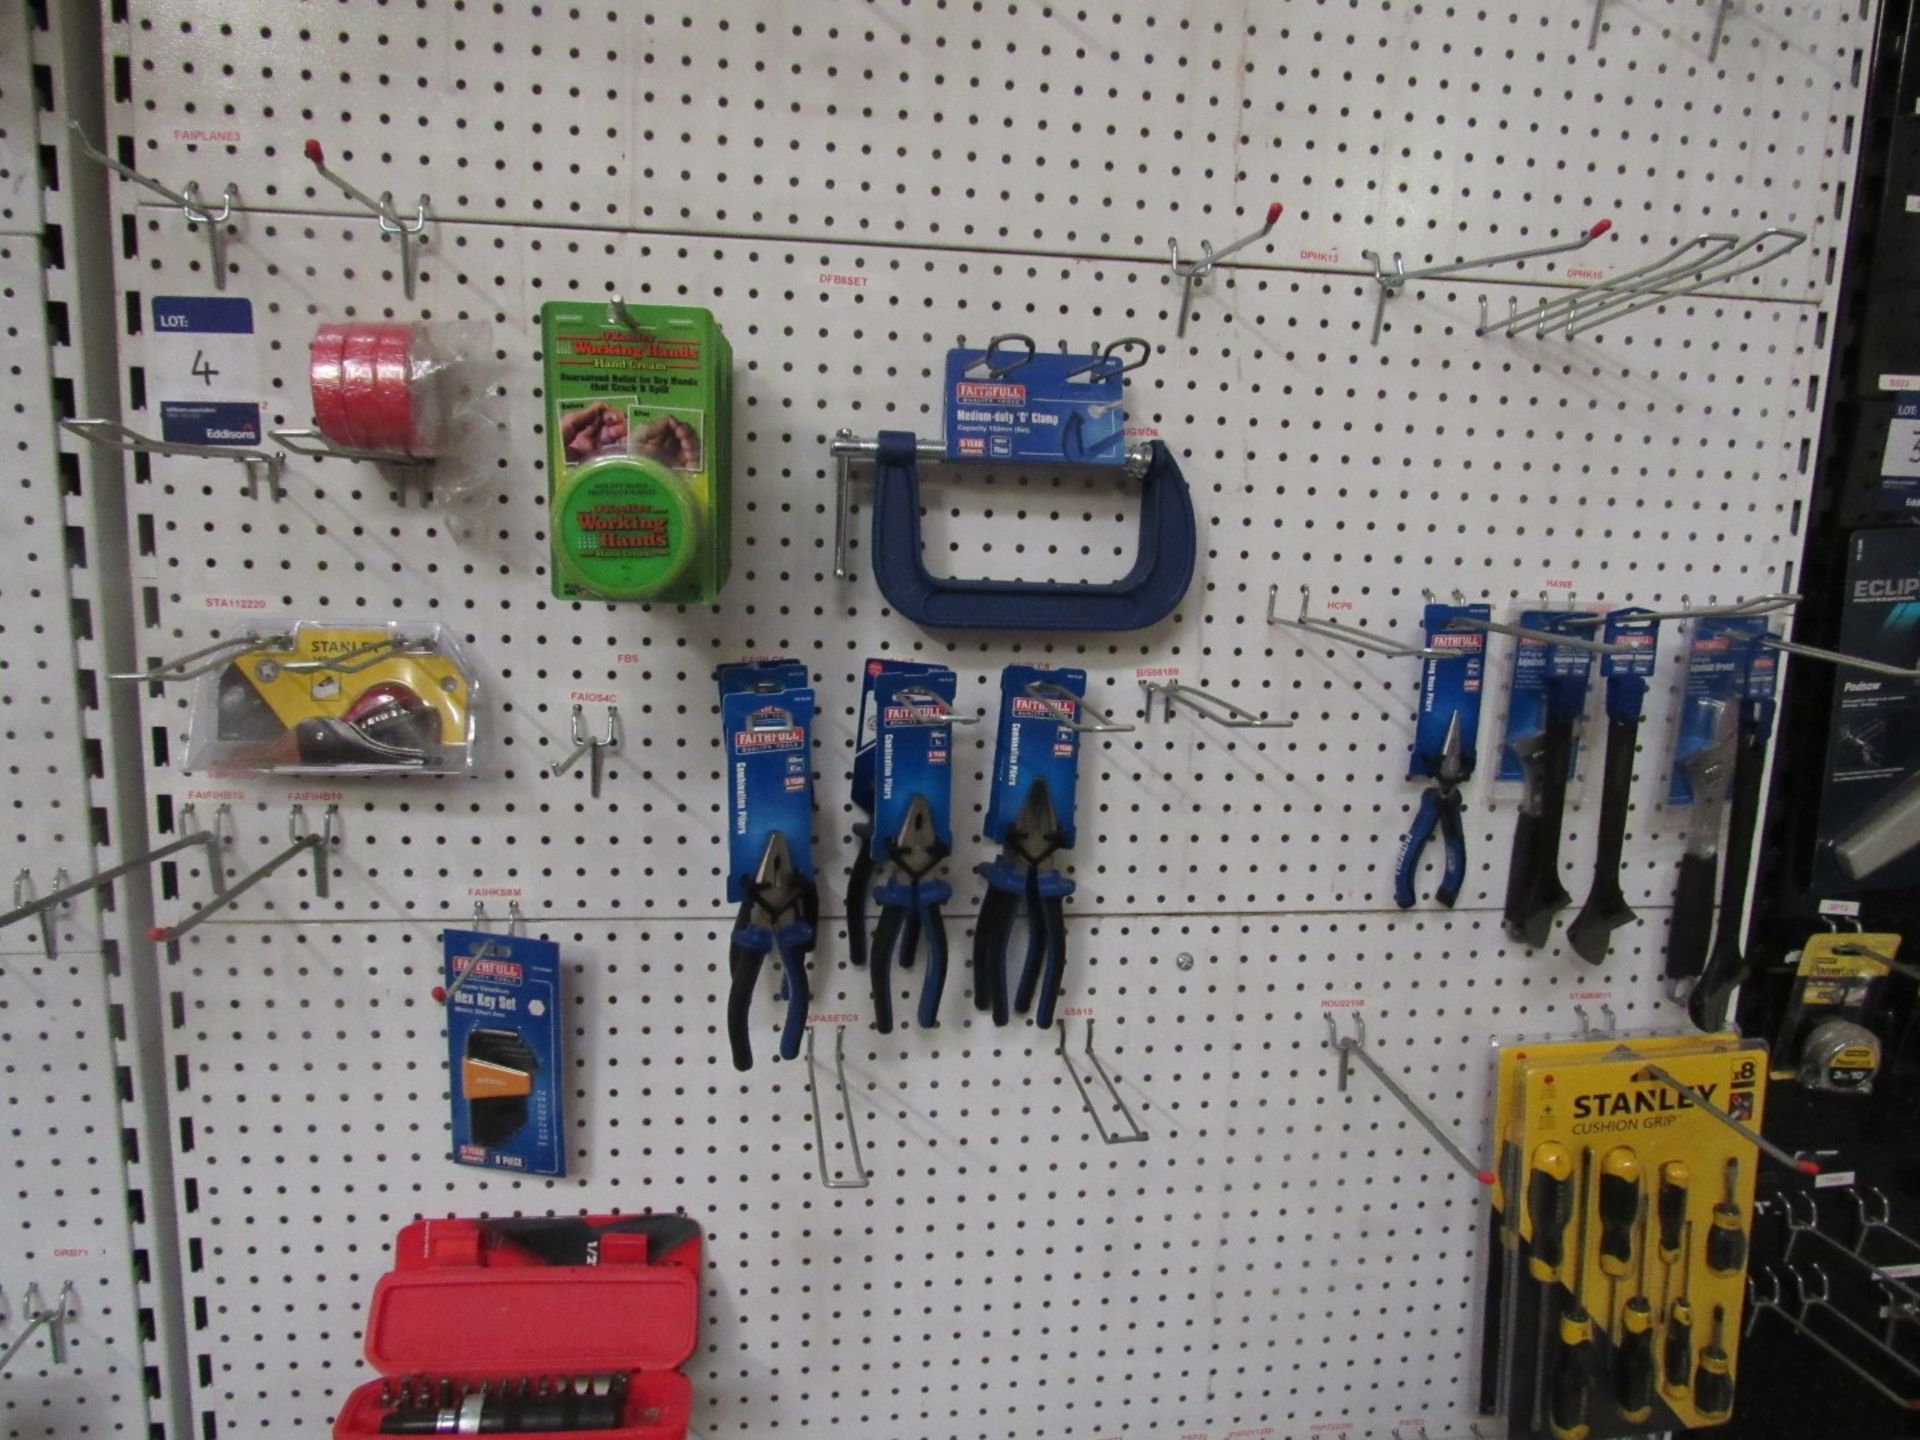 Various Hand Tools and Adhesives to ERA, hand saws, pliers, screwdrivers, glue, tape etc - Image 3 of 3